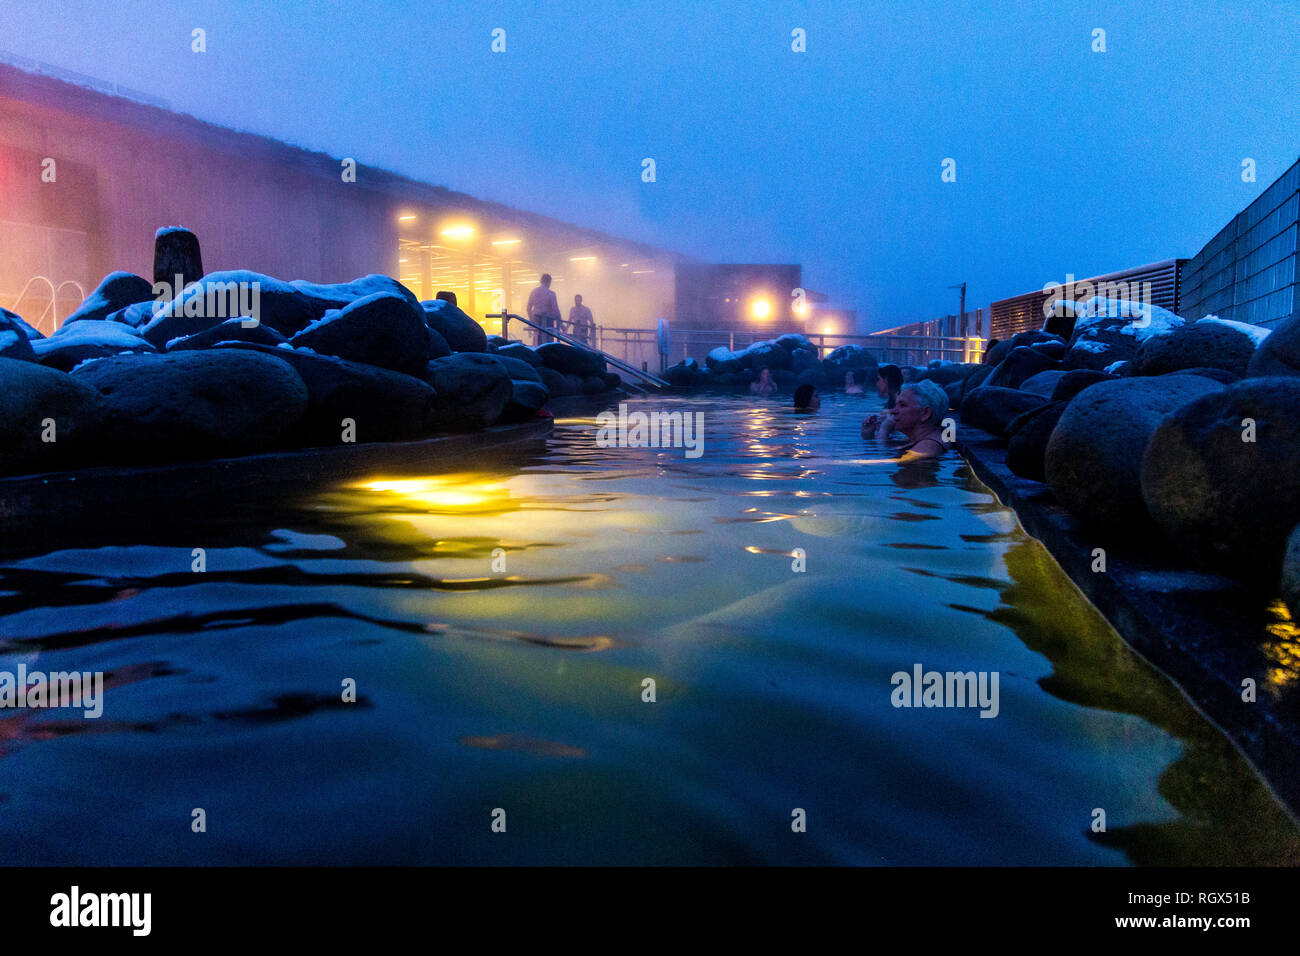 Laugarvatn Fontana thermal baths at dusk in Iceland Stock Photo